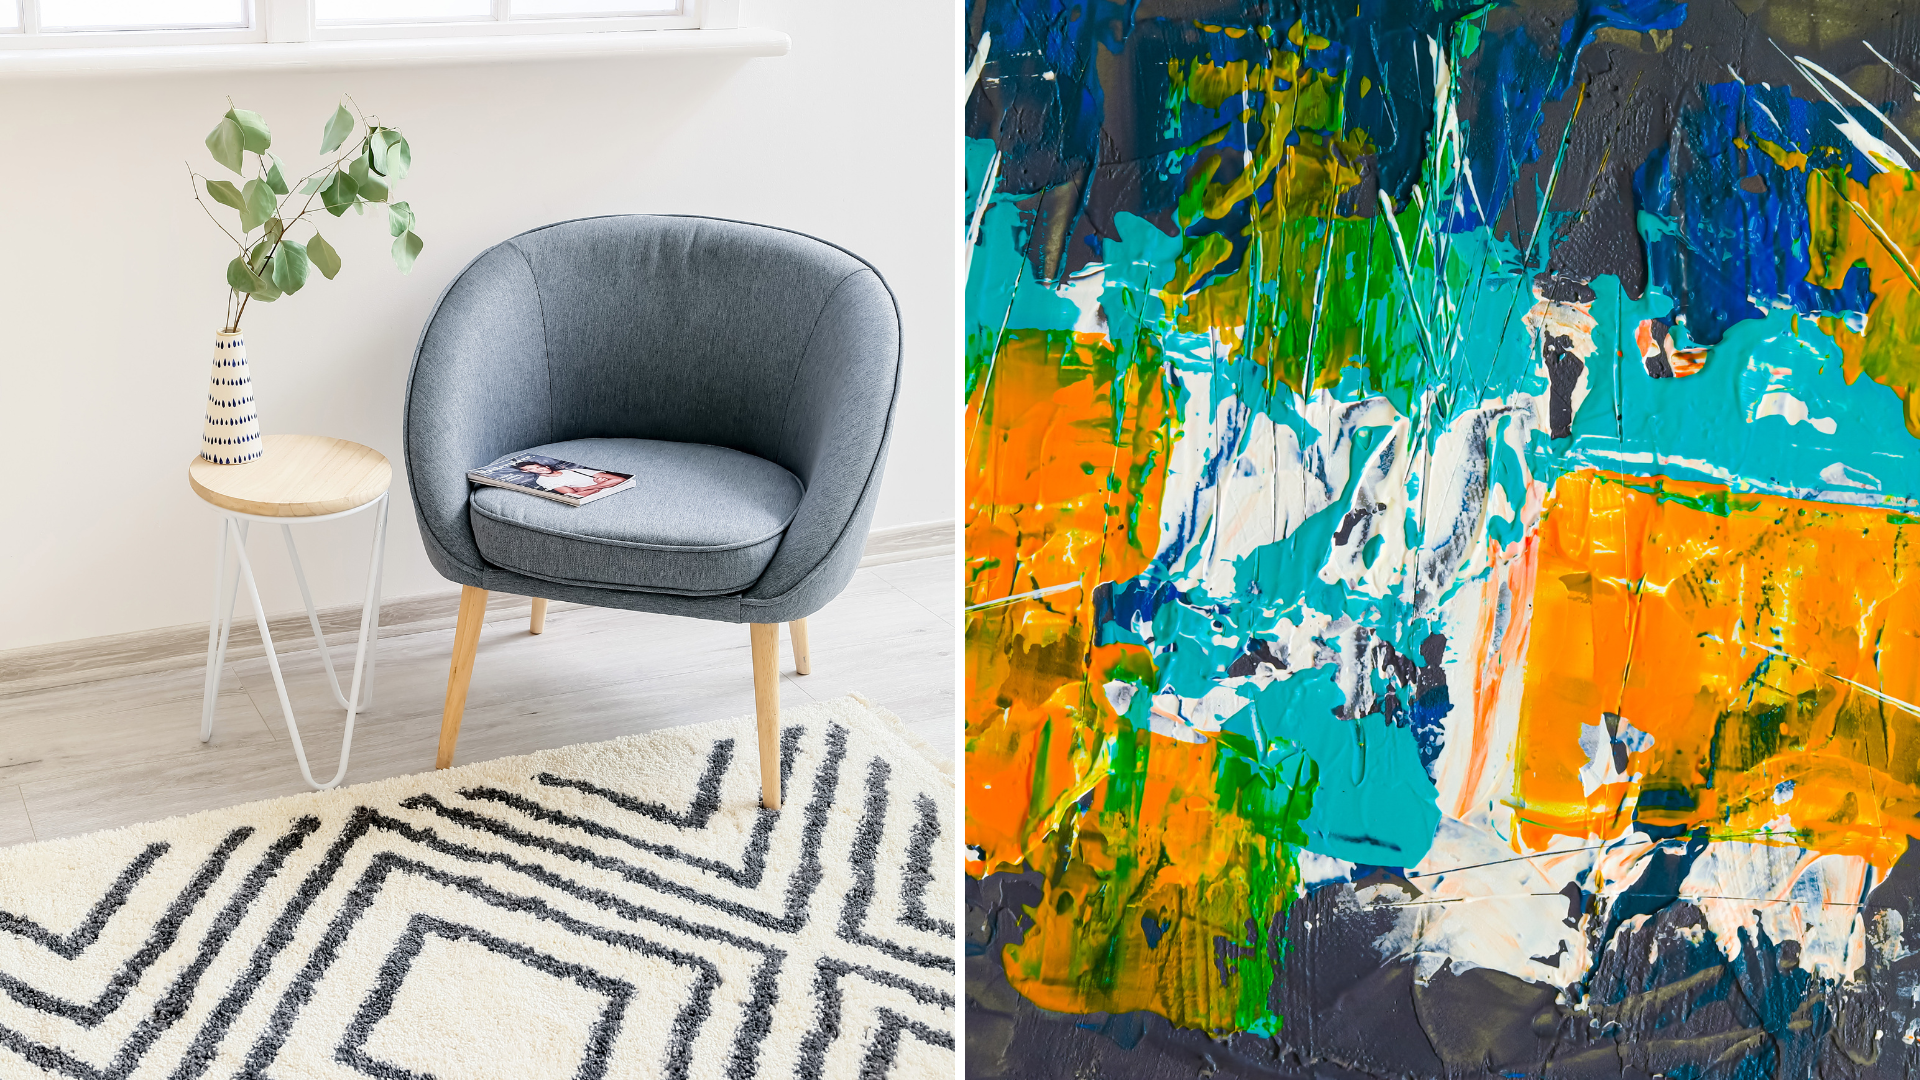 Budget-friendly ways like geometric rugs, vintage lighting fixtures, and abstract art